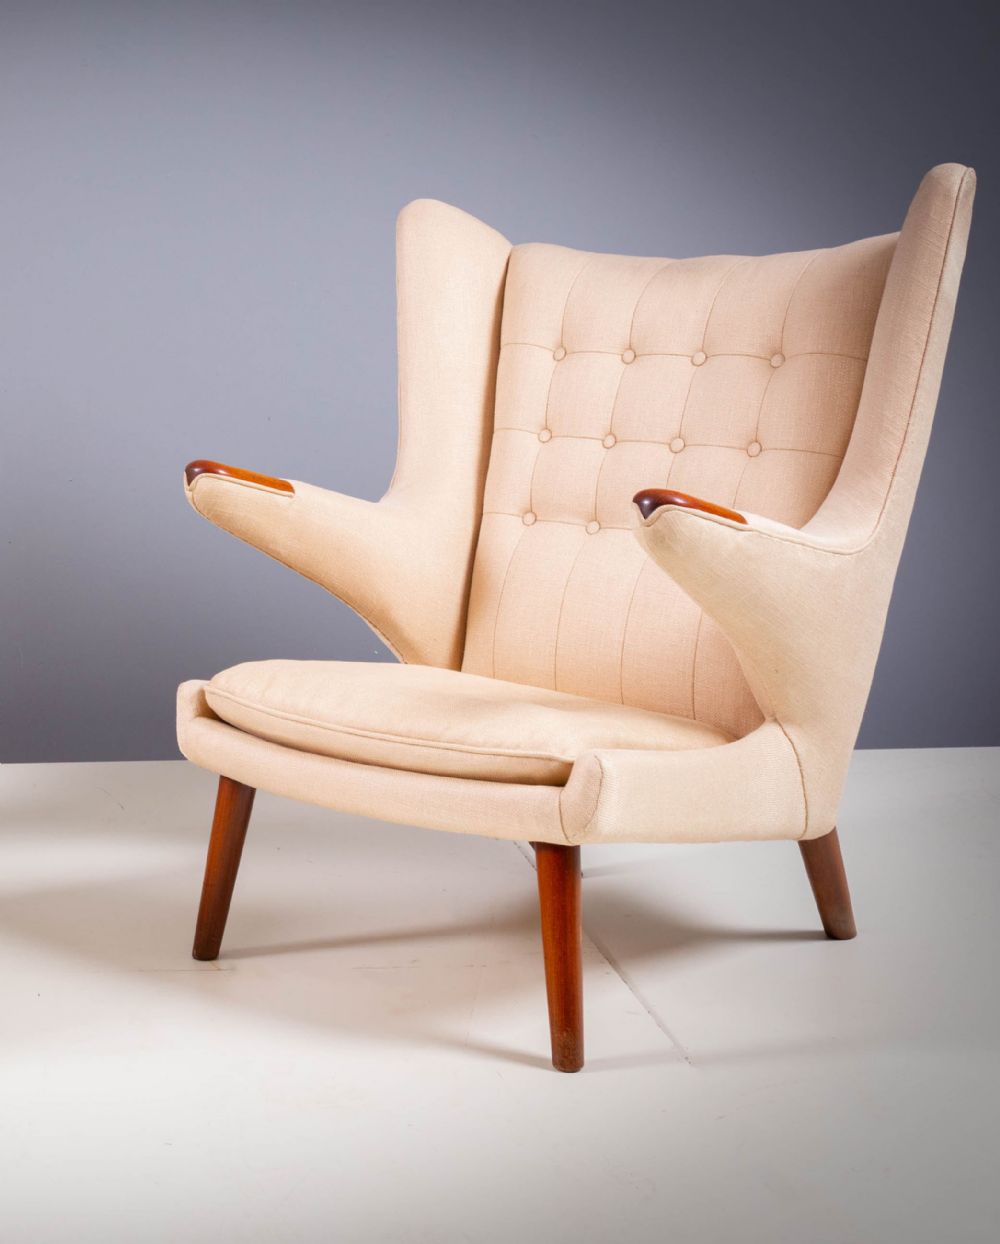 A 'PAPA BEAR' CHAIR, DESIGNED by HANS WEGNER,  at deVeres Auctions